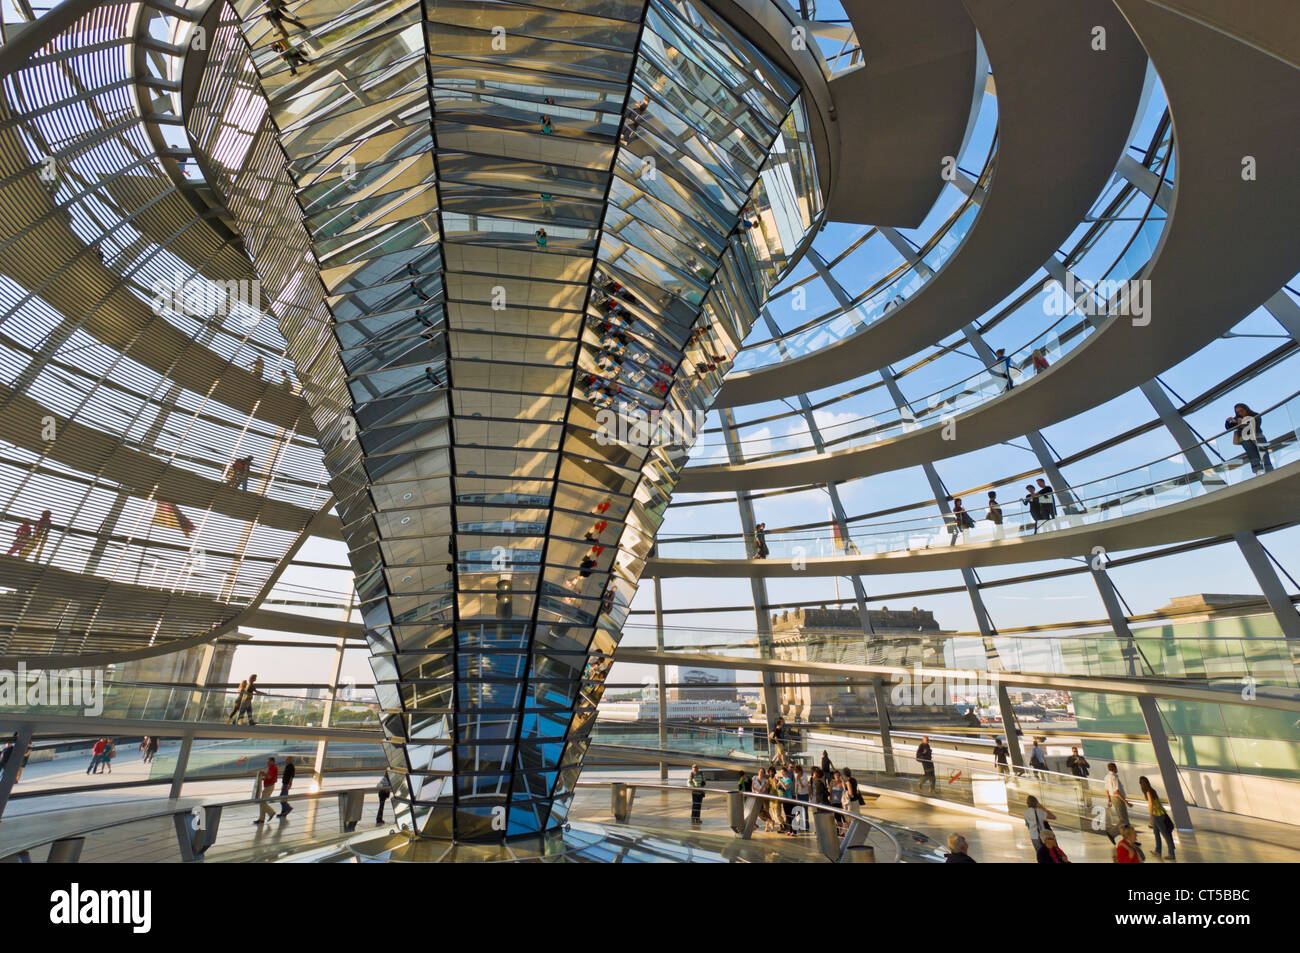 Glass dome and mirrored central glass funnel above the Plenary chamber of the Reichstag building Berlin Germany EU Europe Stock Photo